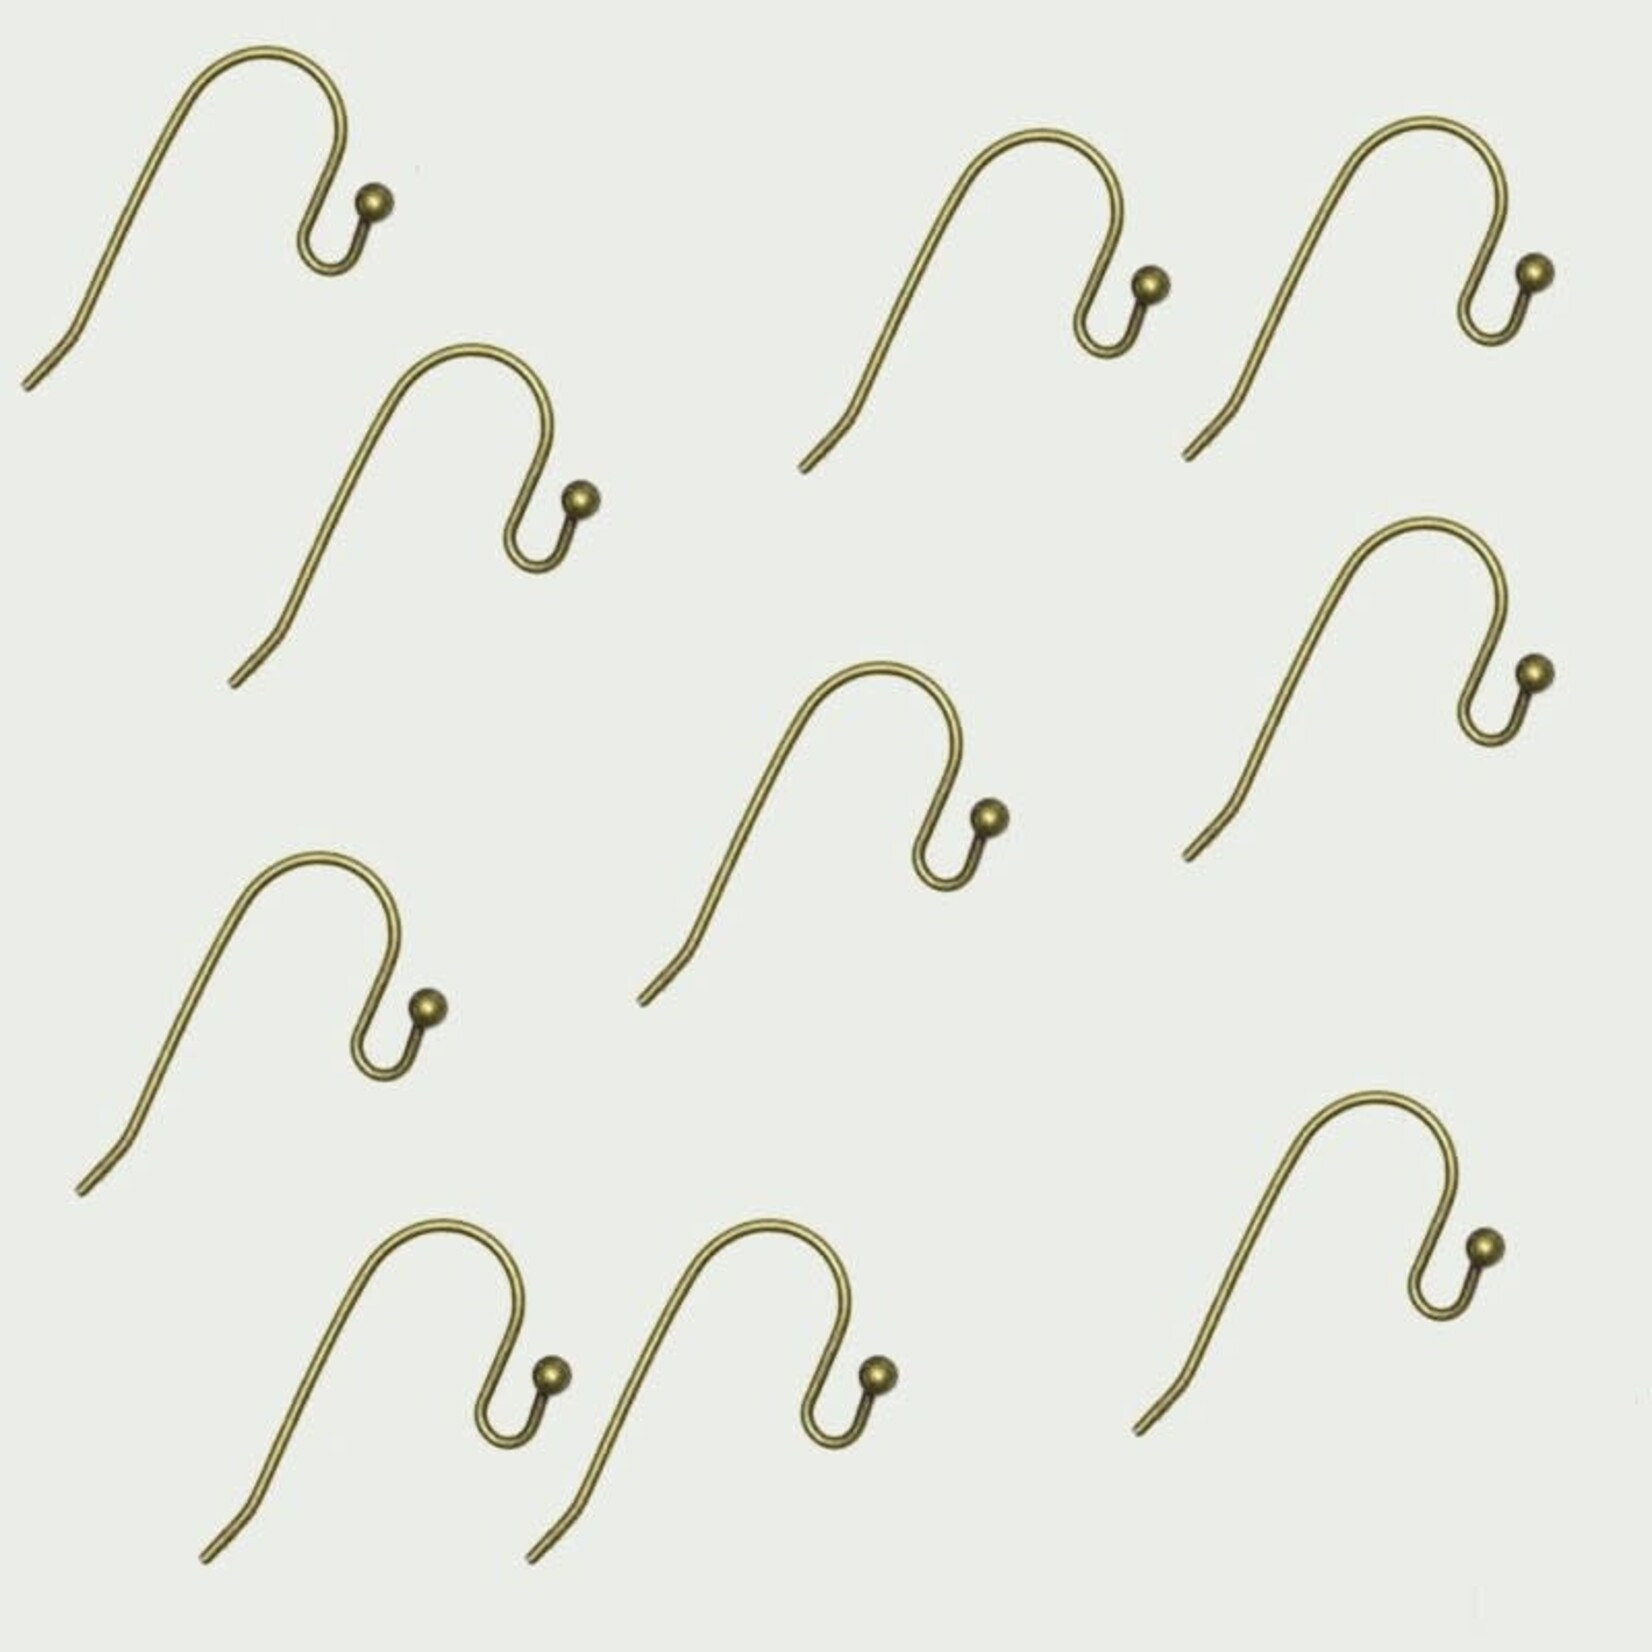 French Earwire Nickel-Free Antique Brass Plated - 10 pieces